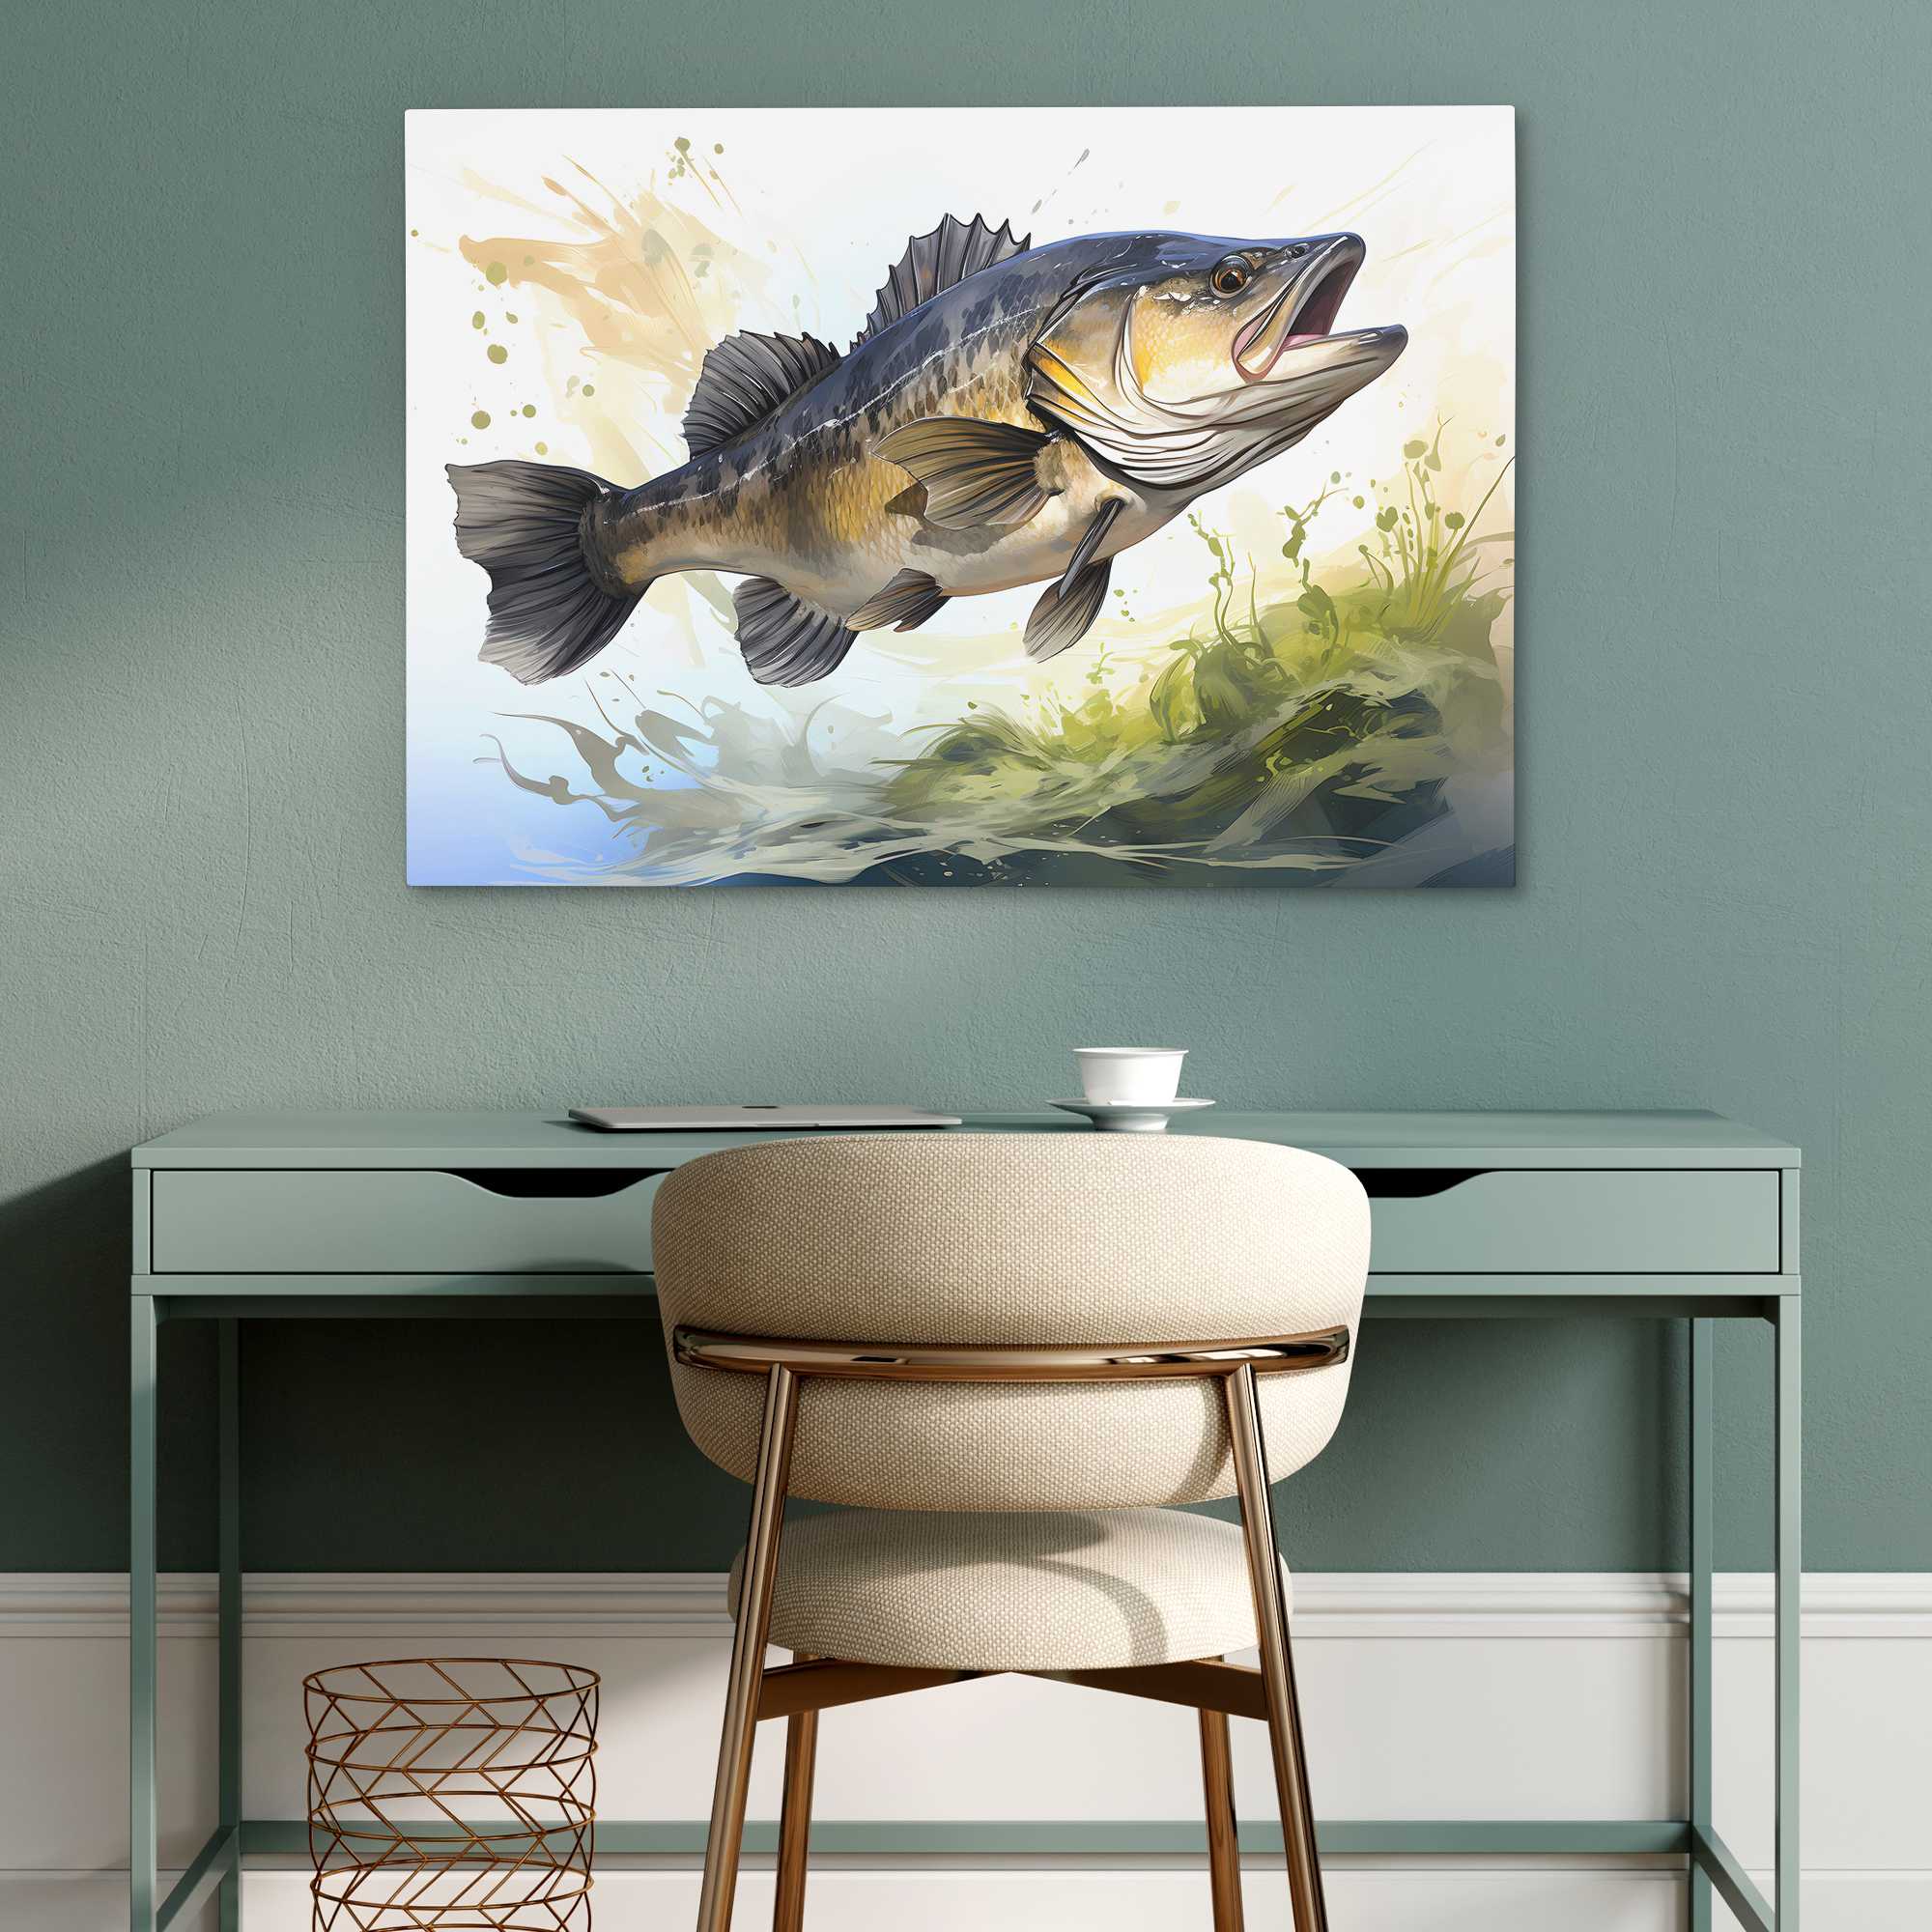 Bass-Fishing on the South Coast (engraving) Our beautiful pictures are  available as Framed Prints, Photos, Wall Art and Photo Gifts